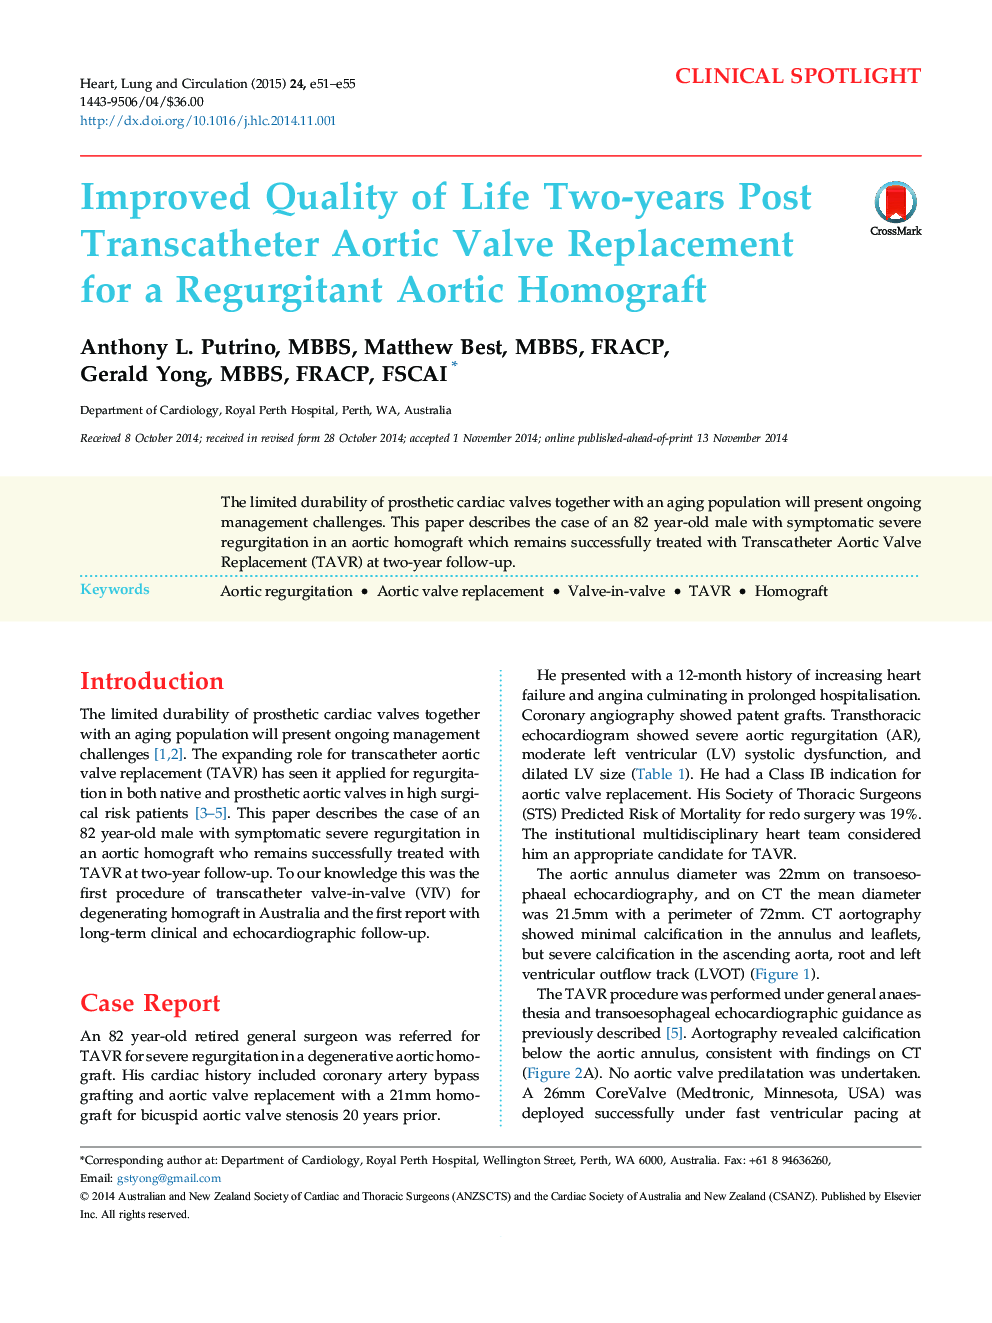 Improved Quality of Life Two-years Post Transcatheter Aortic Valve Replacement for a Regurgitant Aortic Homograft